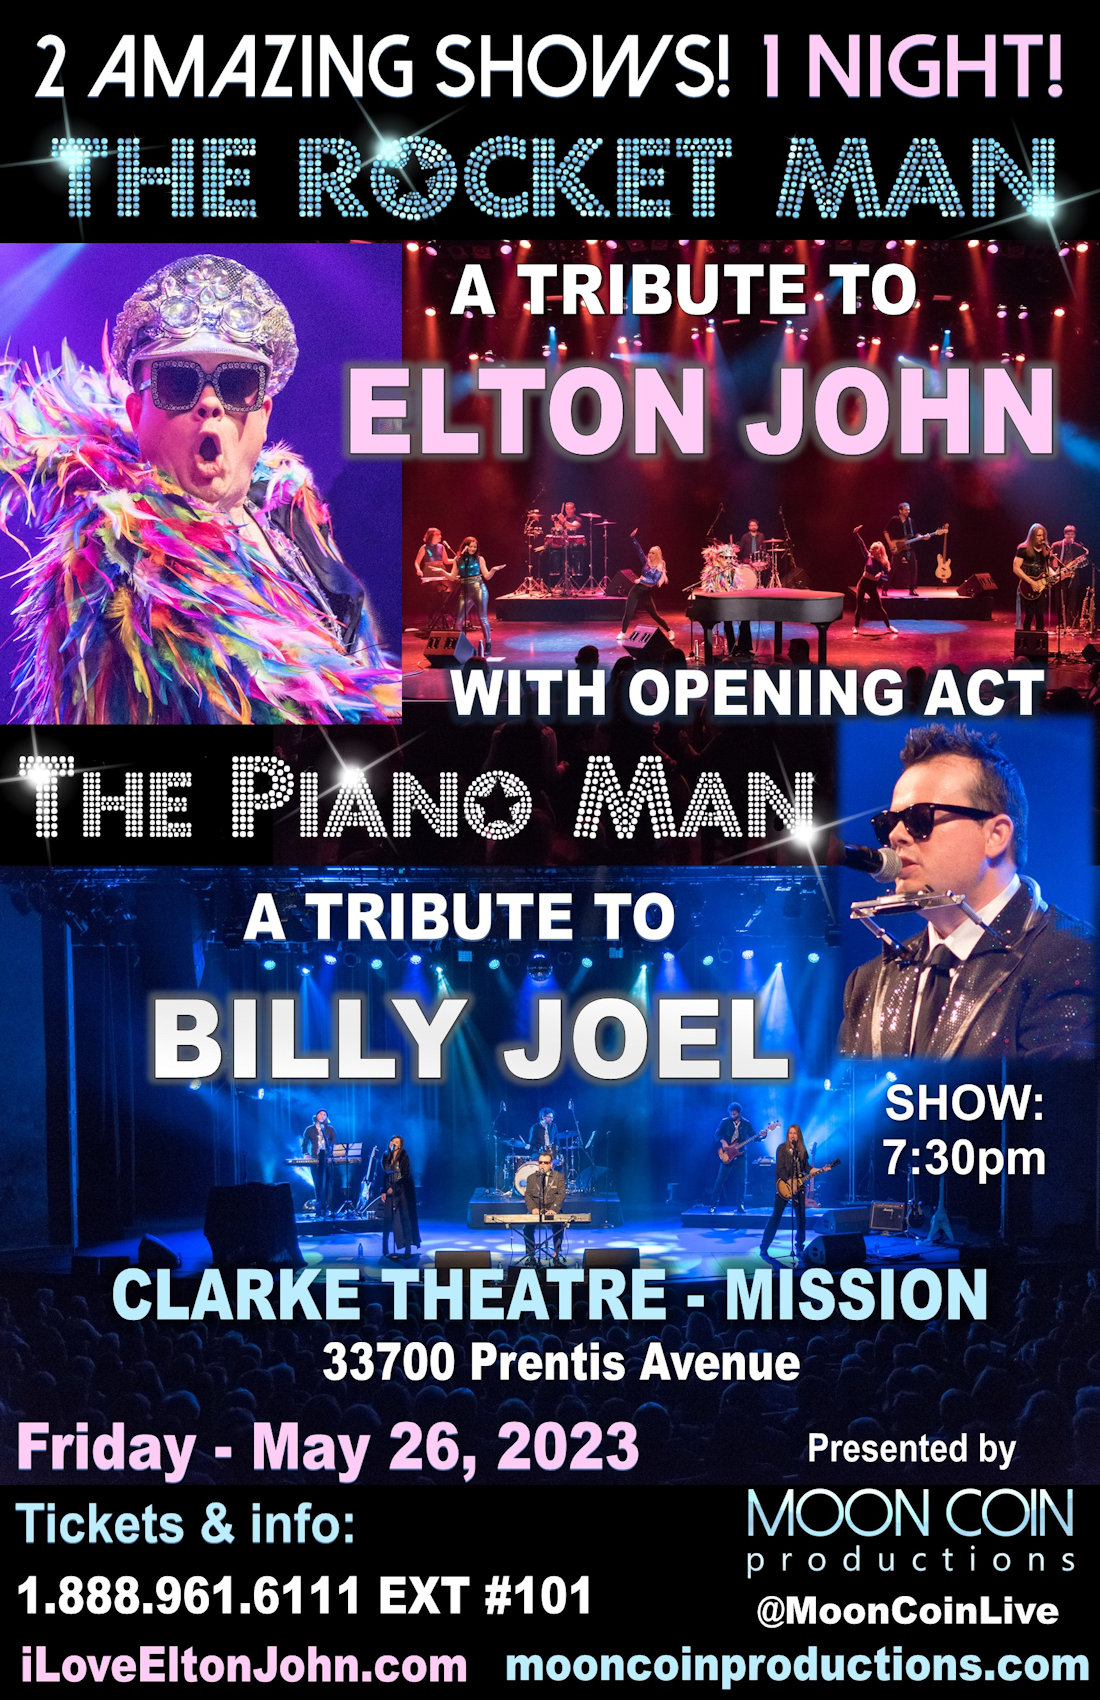 The Rocket Man (A Tribute to Elton John) With Special Guests, The Piano Man (A Tribute to Billy Joel)